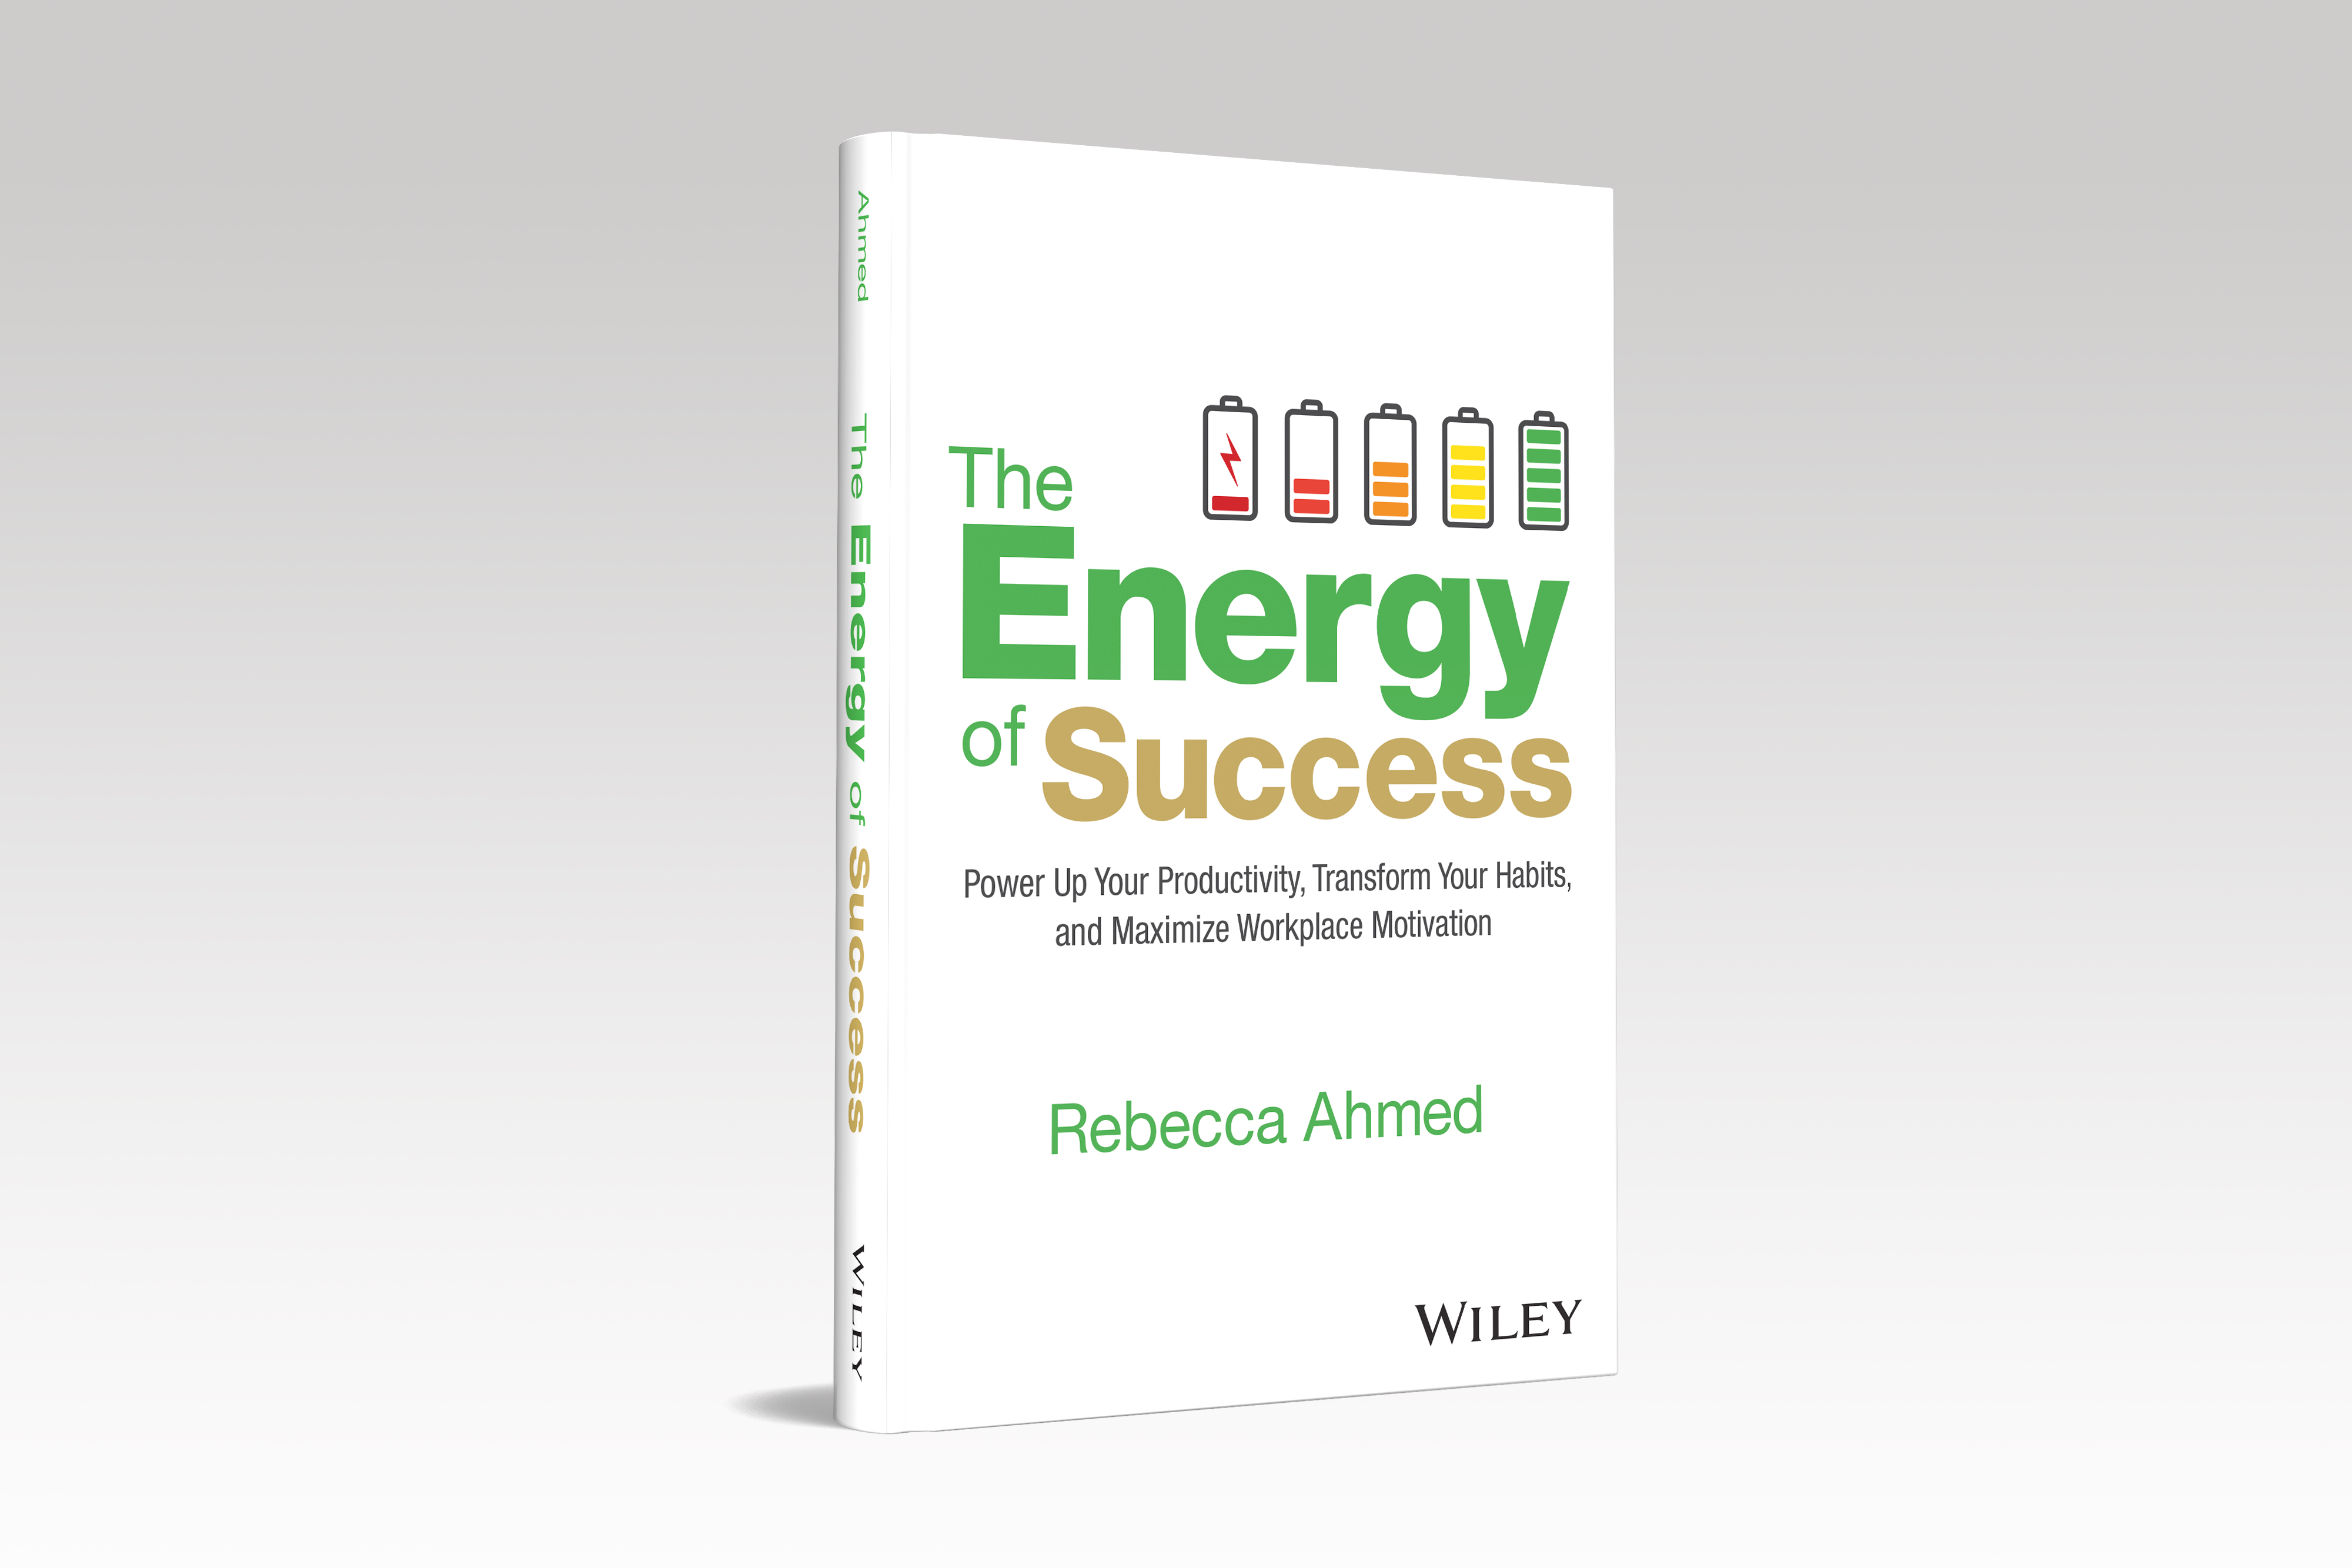 The Energy of Success: Power Up Your Productivity, Transform Your Habits, and Maximize Workplace Motivation